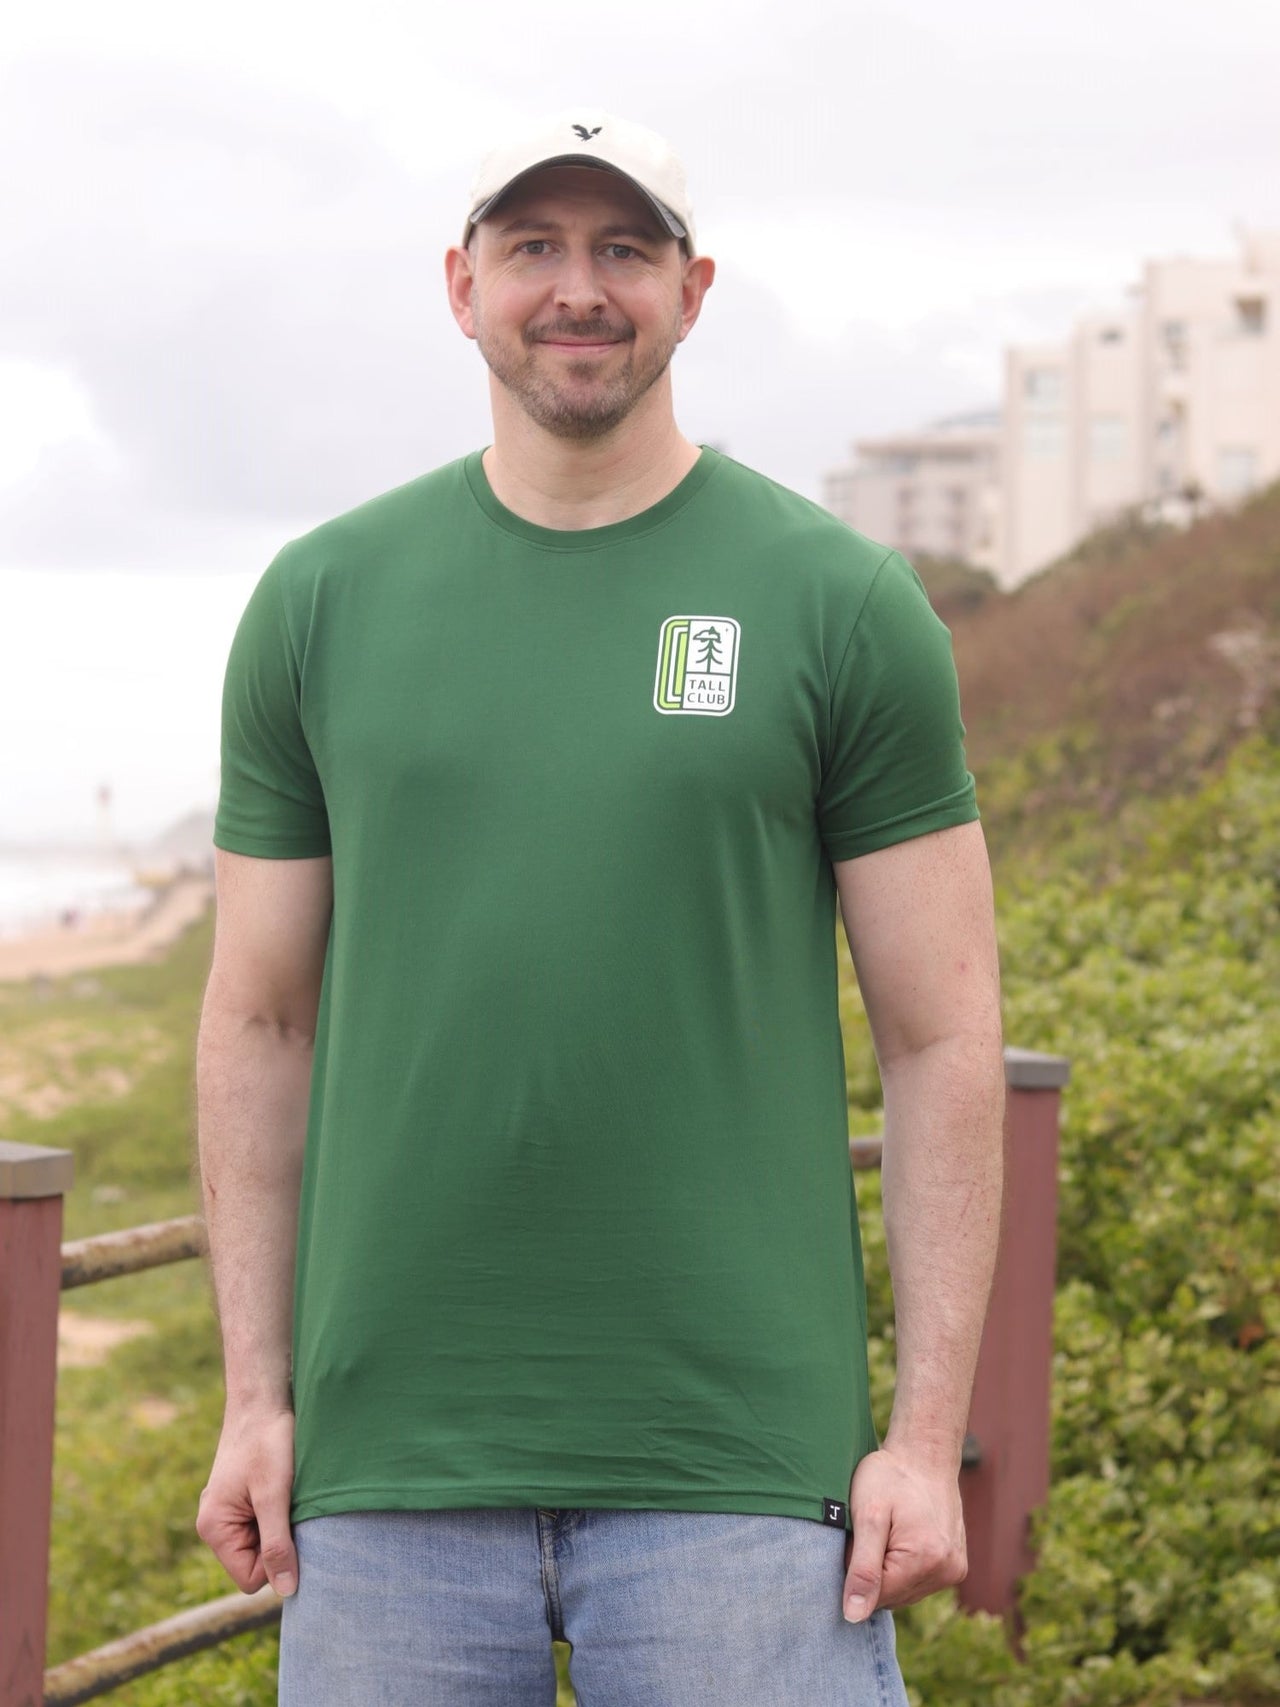 A tall slim guy in an XL tall graphic t-shirt with a tall club design.